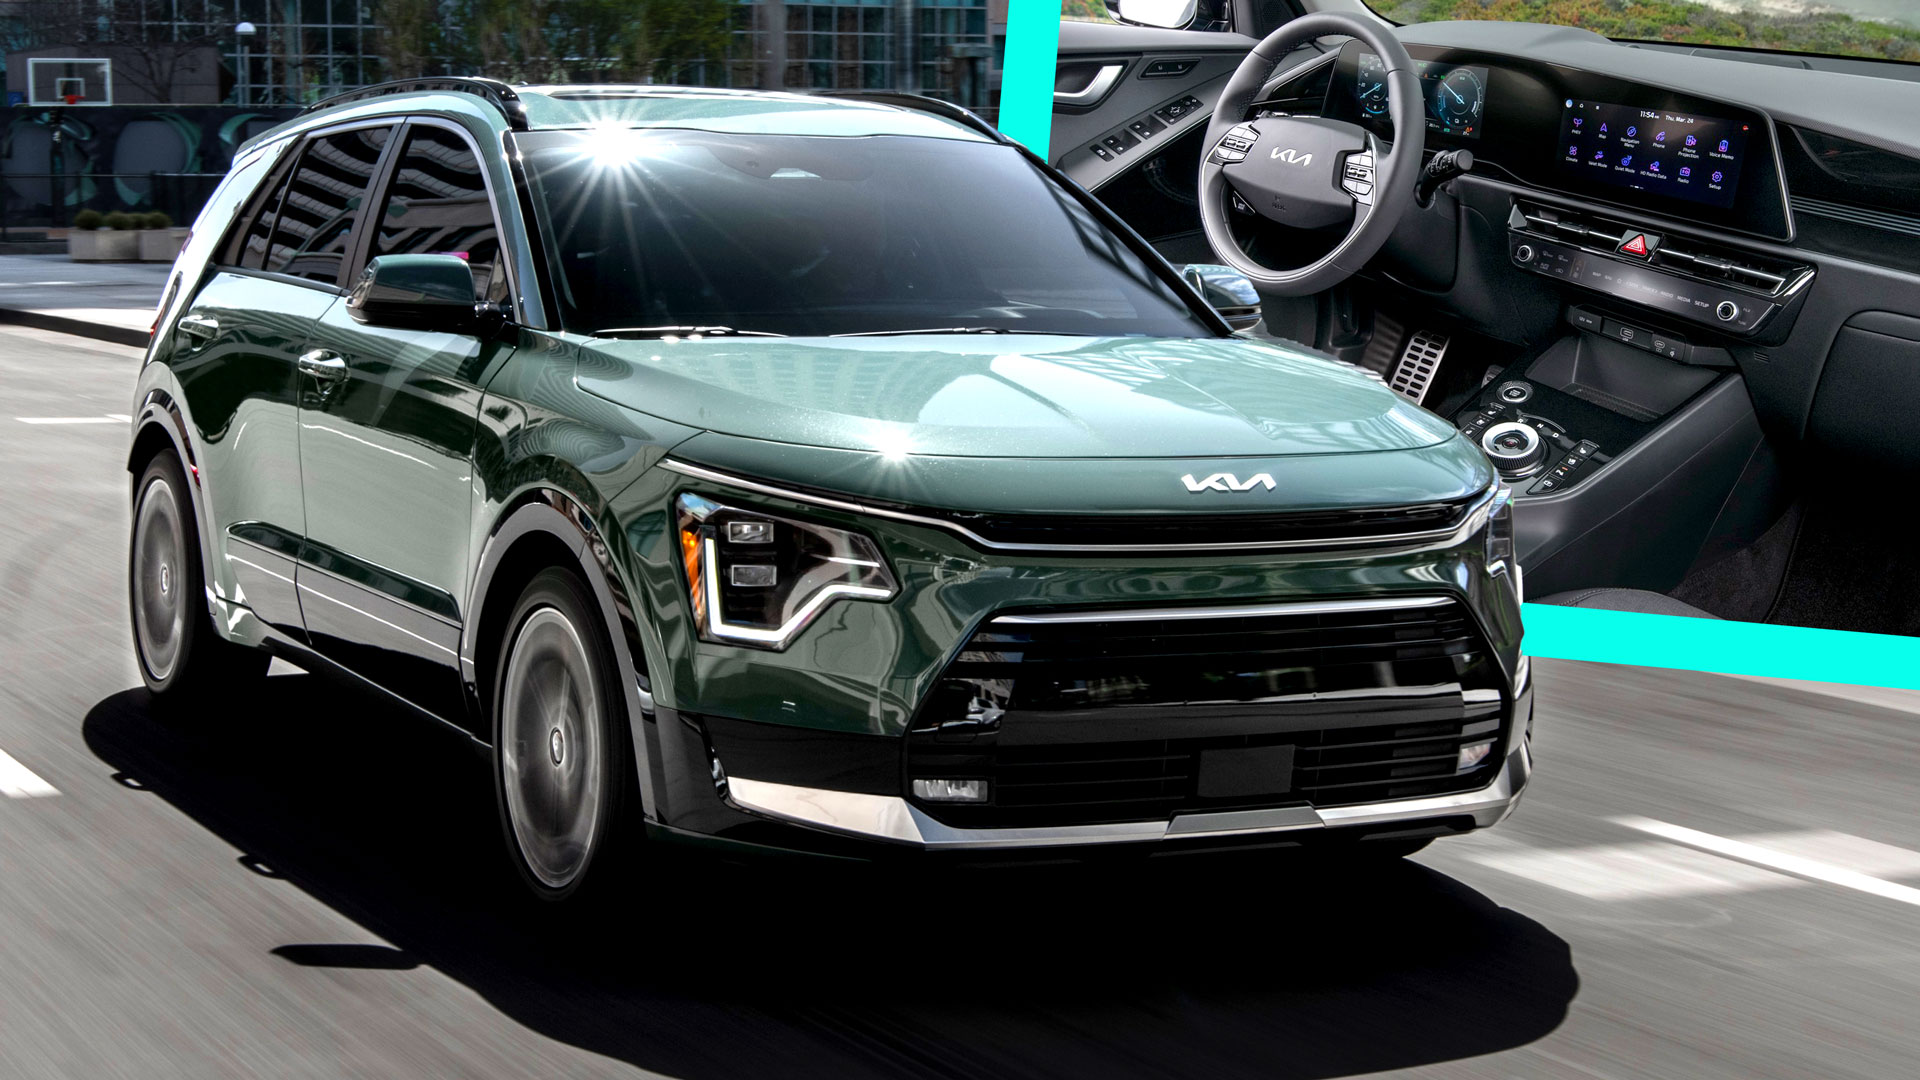 We’re Driving The 2023 Kia Niro: What Do You Want To Know About It?﻿ Auto Recent